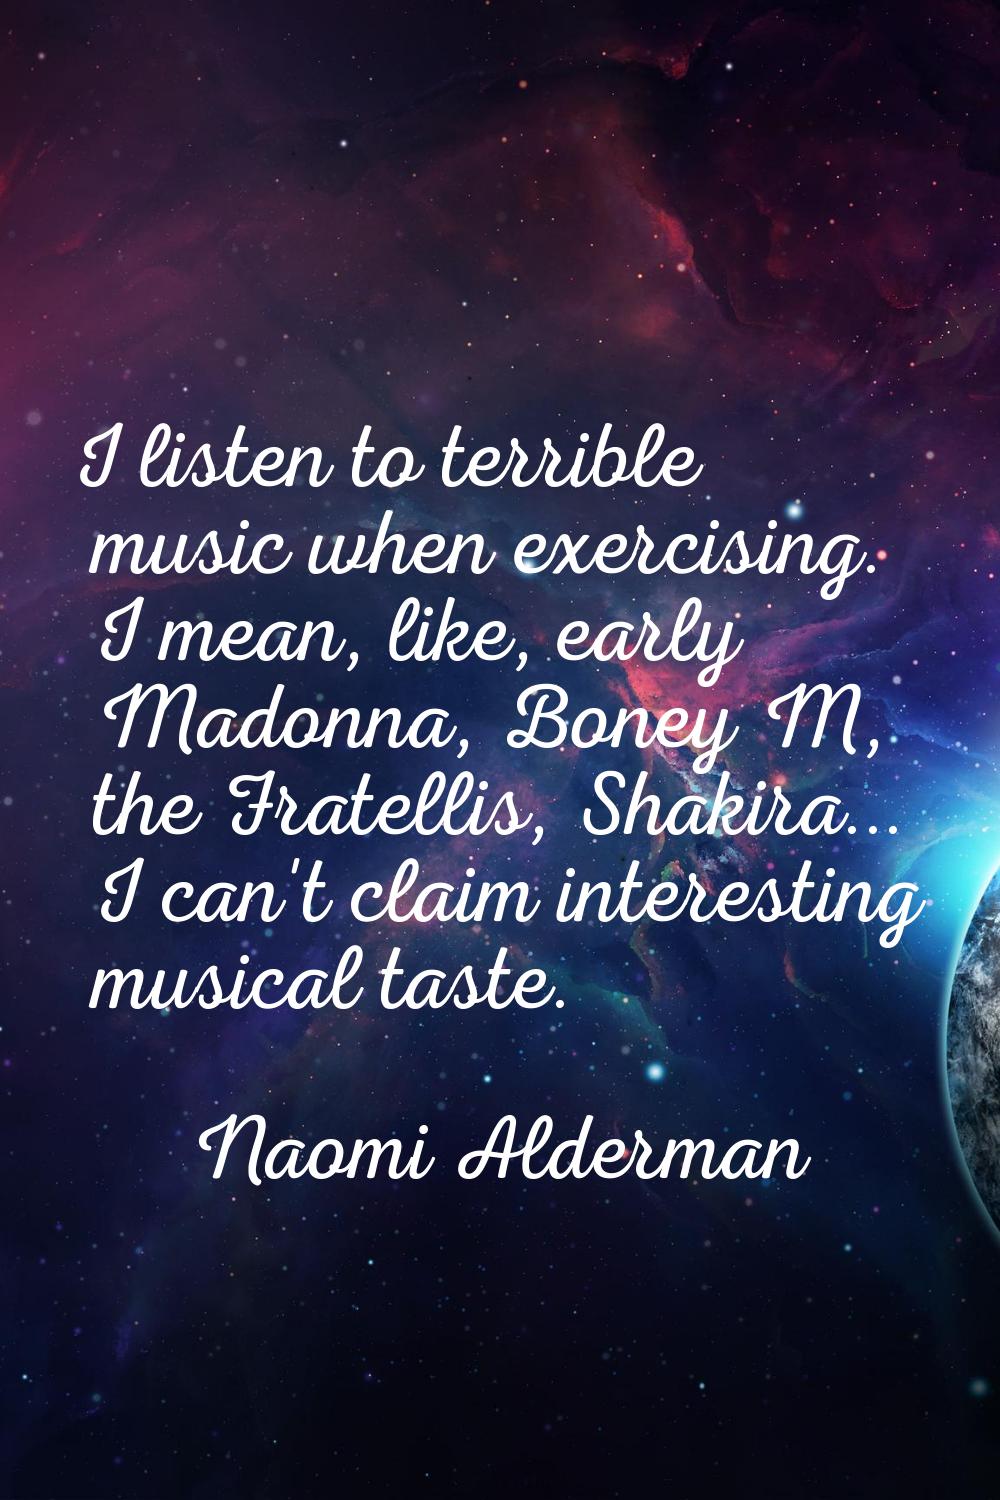 I listen to terrible music when exercising. I mean, like, early Madonna, Boney M, the Fratellis, Sh